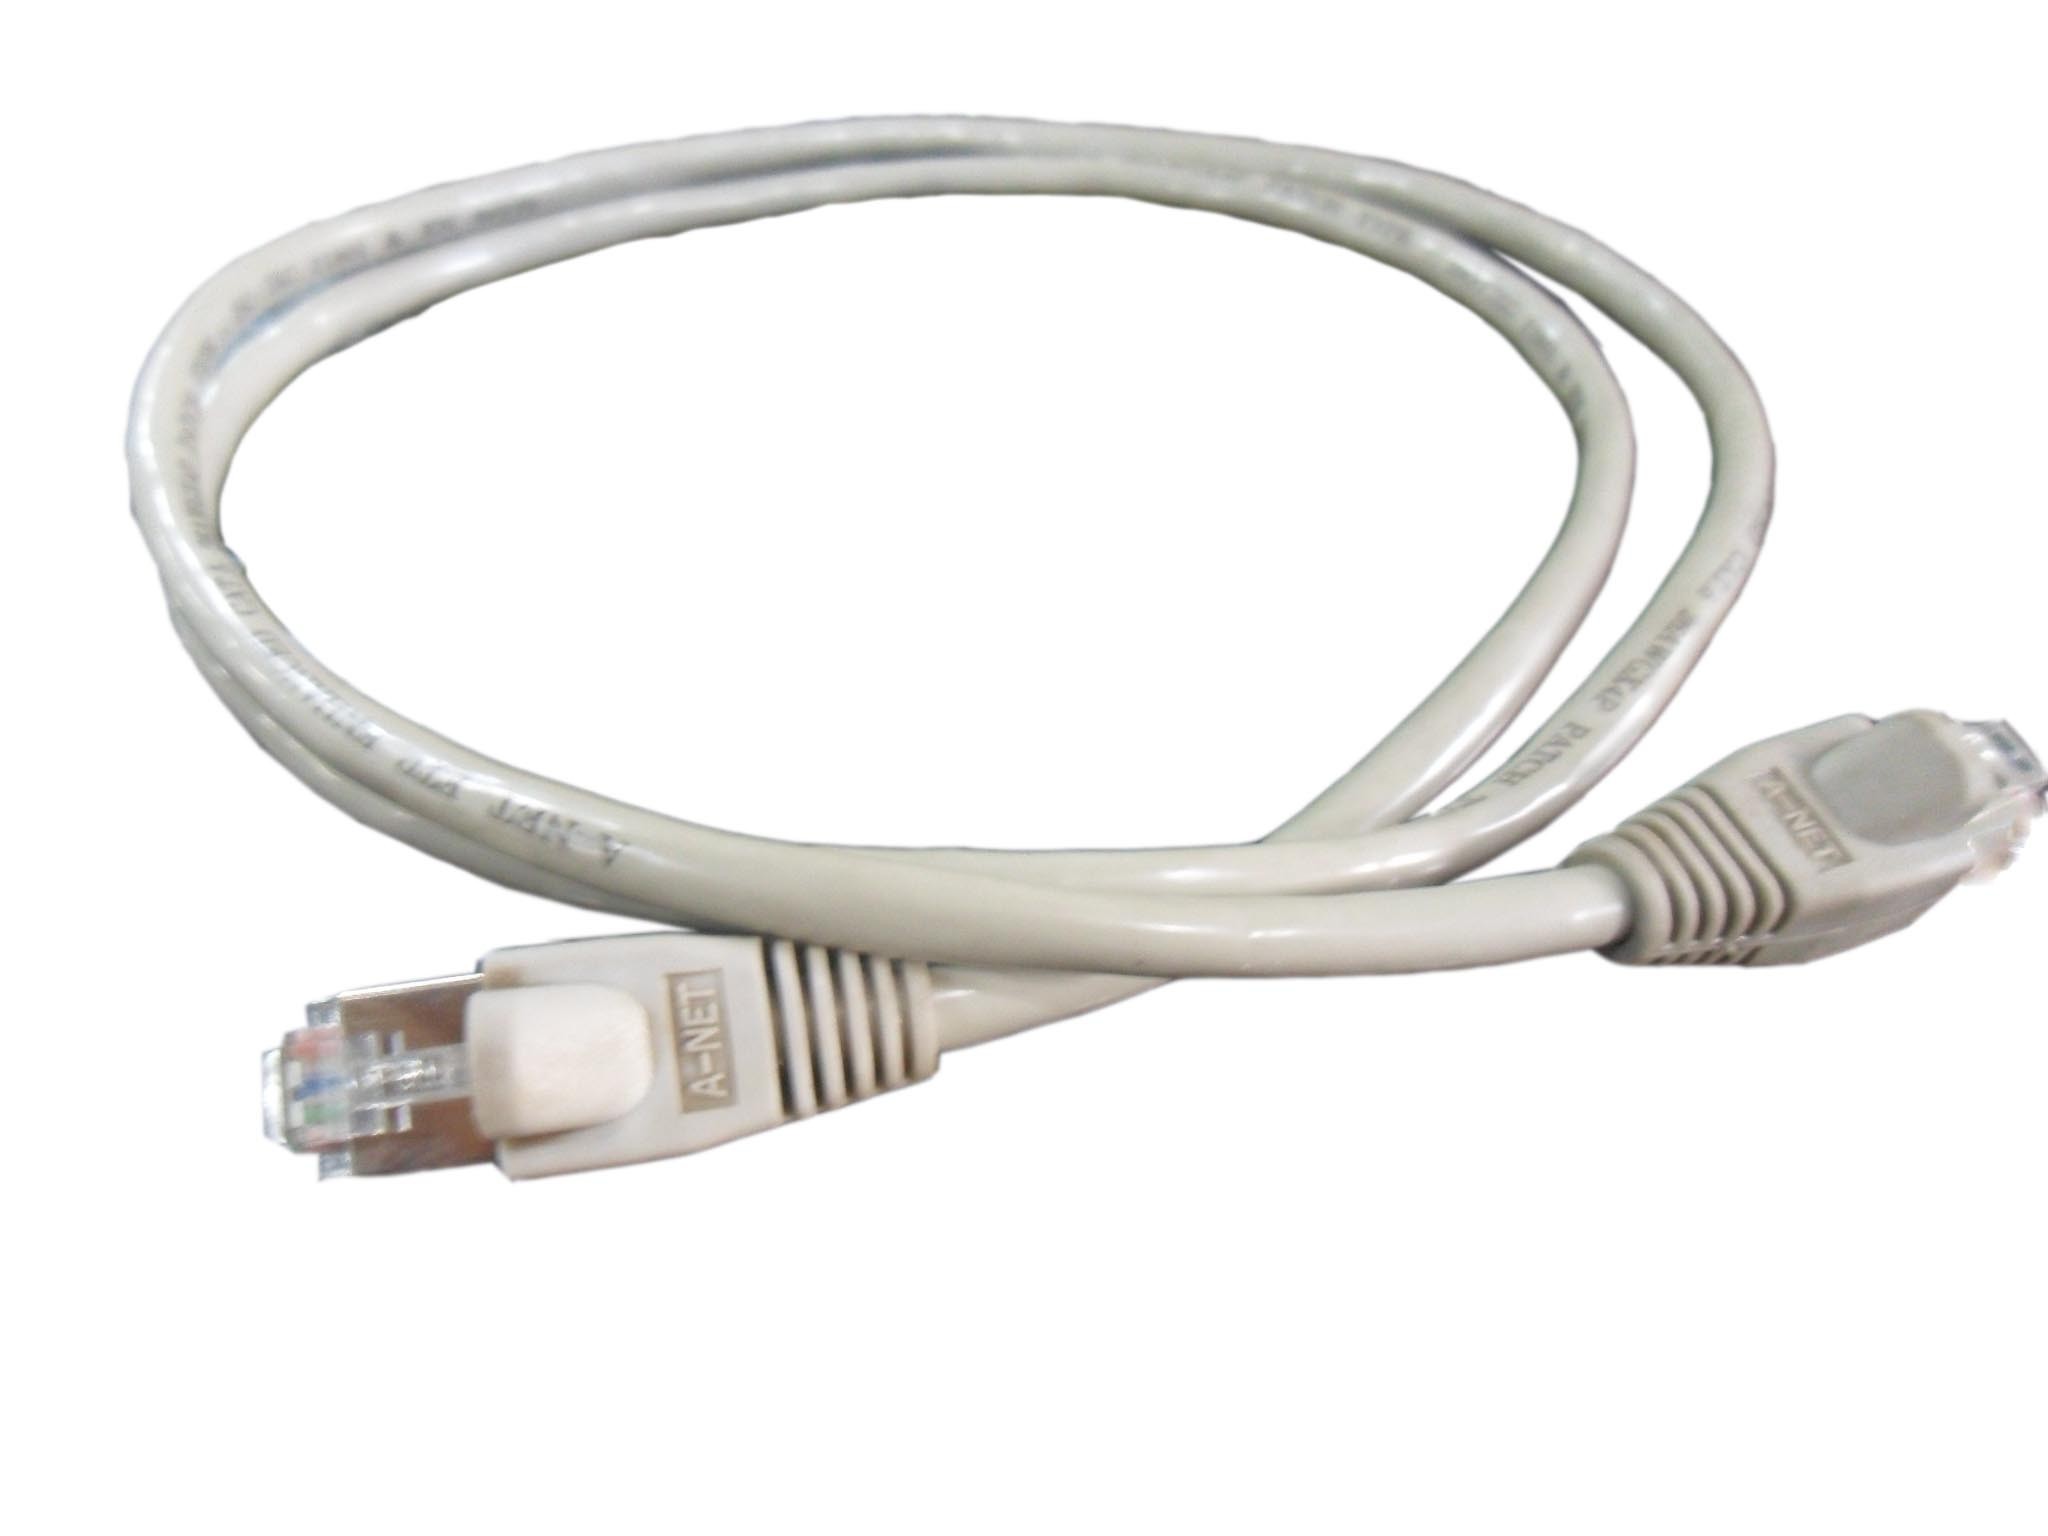 D-link Utp Cat6a Patch Cable/ Patch Cord - New - Buy Utp D-link ...